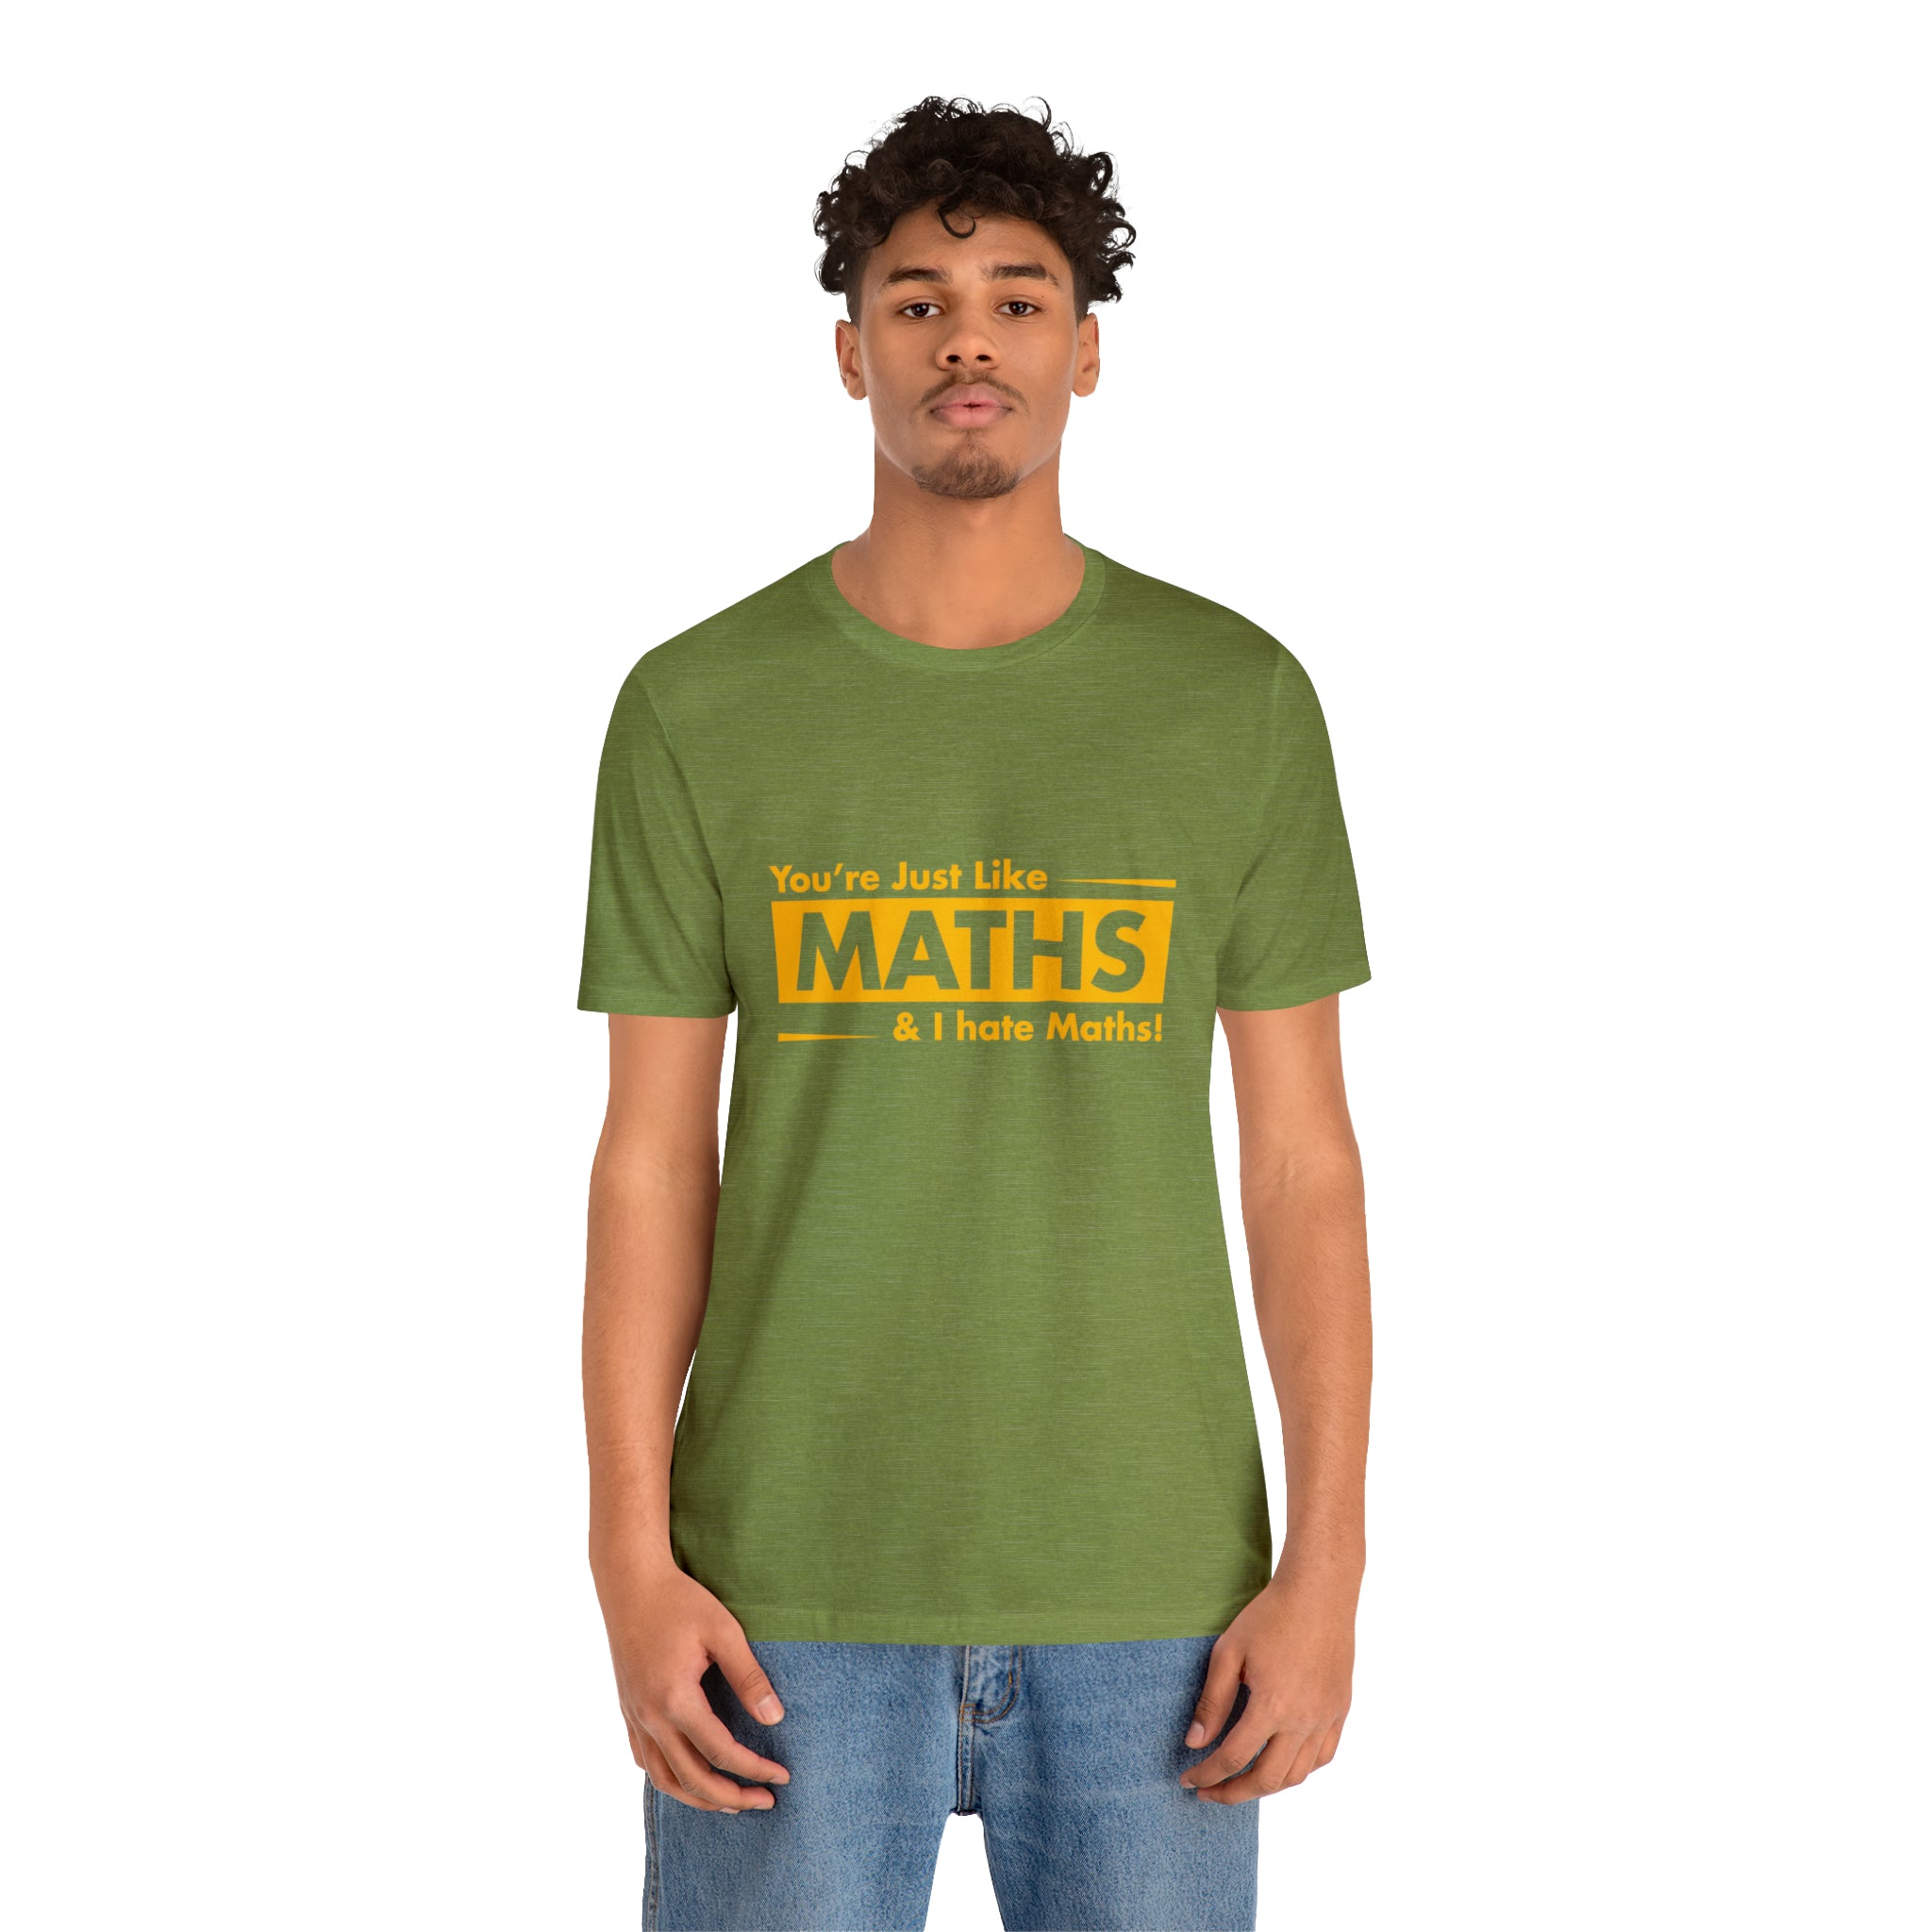 A young man with a great fashion sense wearing a green "You are just like maths and I hate maths" T-Shirt.